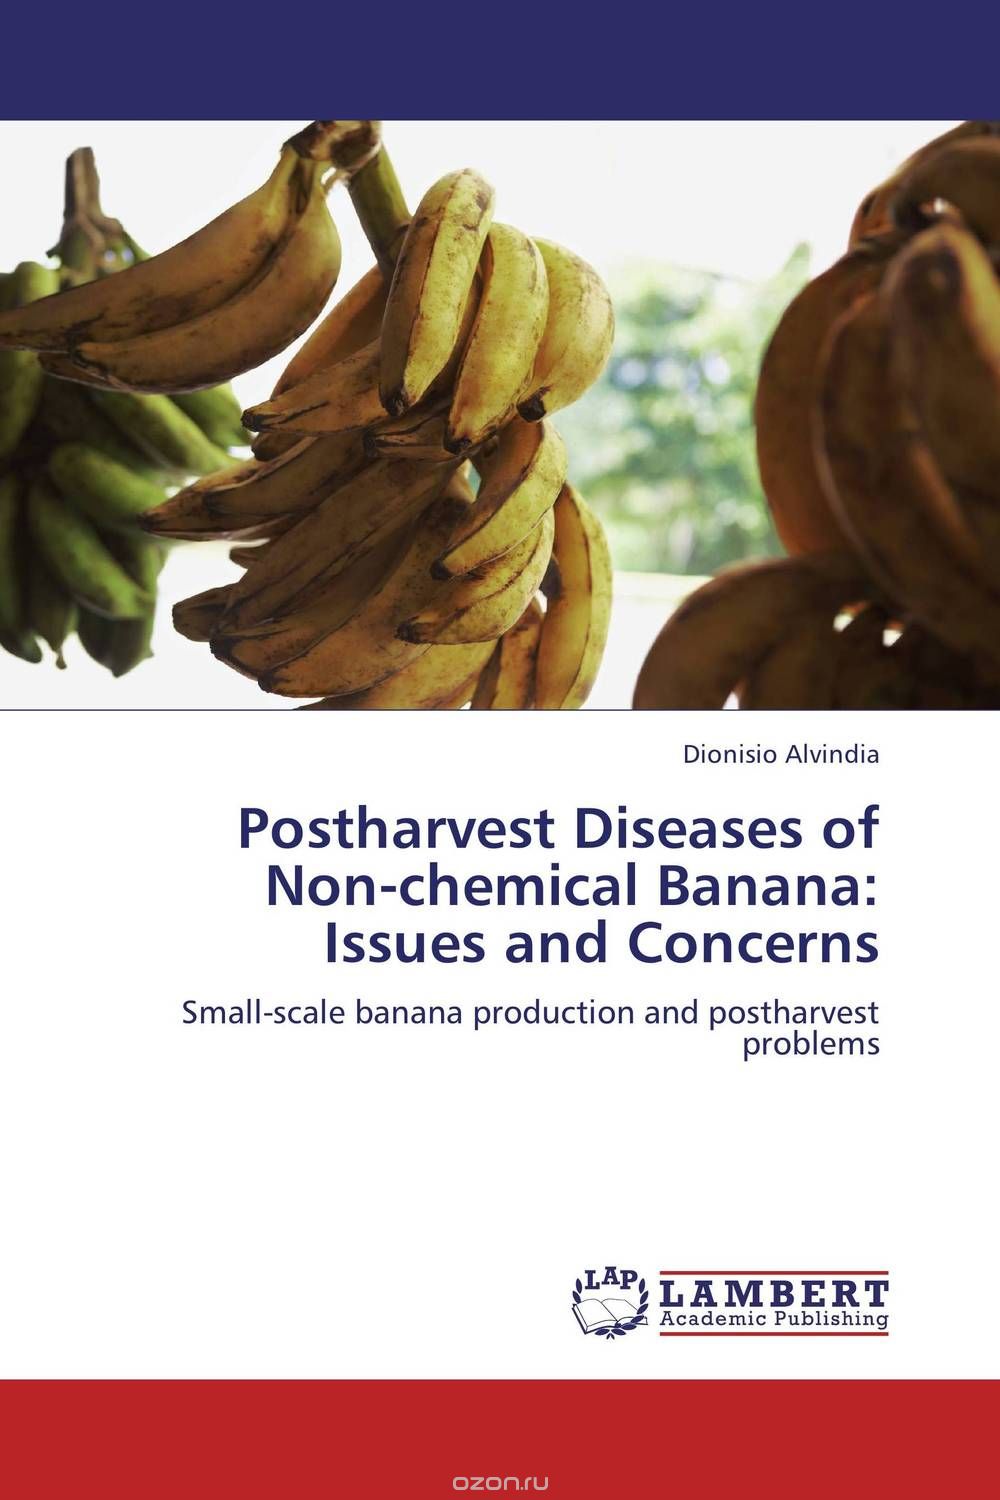 Скачать книгу "Postharvest Diseases of Non-chemical Banana: Issues and Concerns"